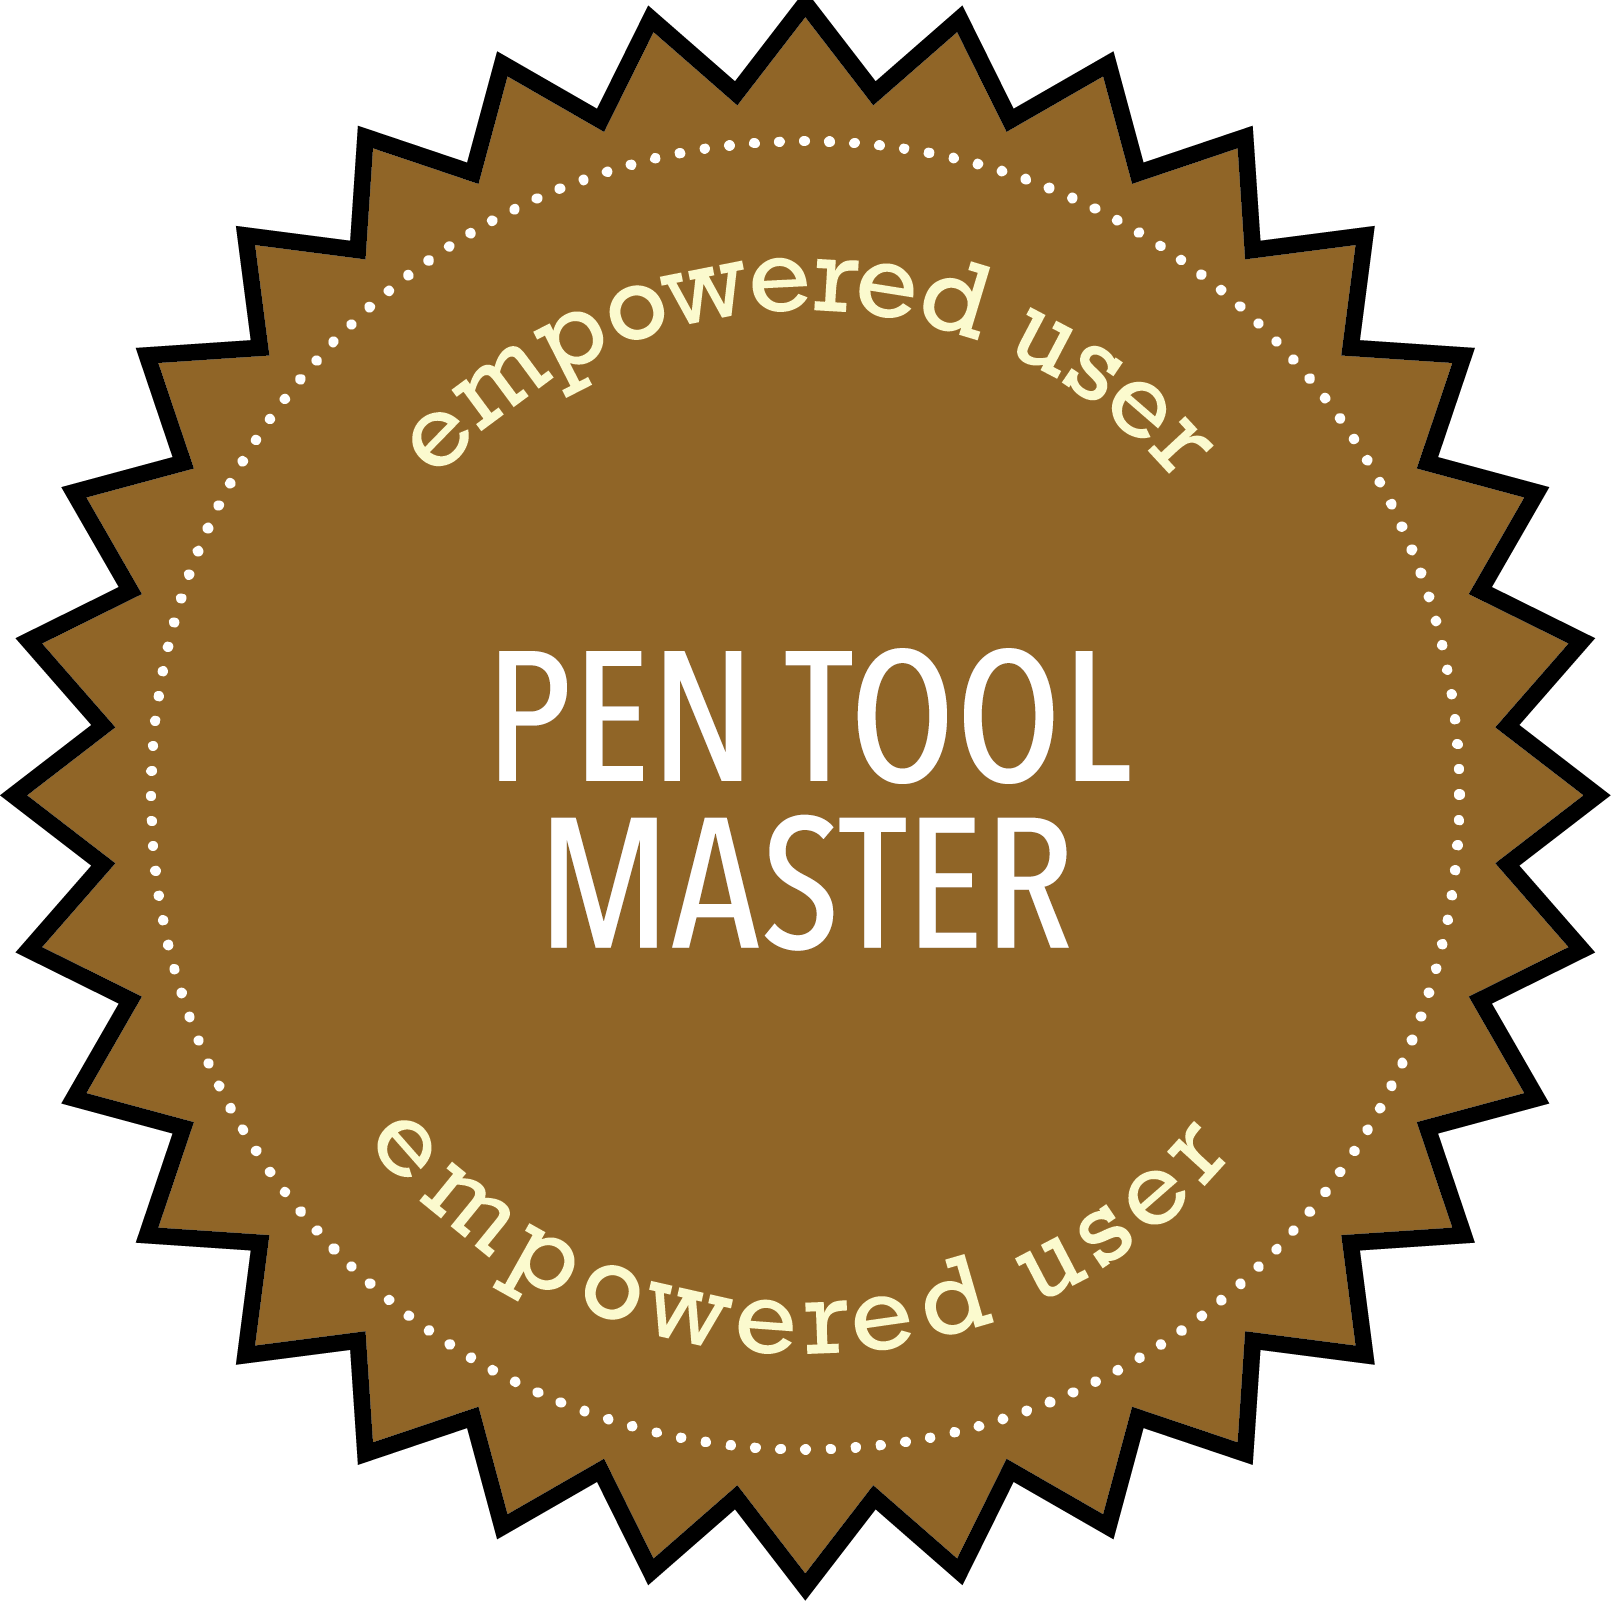 Empowered User Pen Tool Master